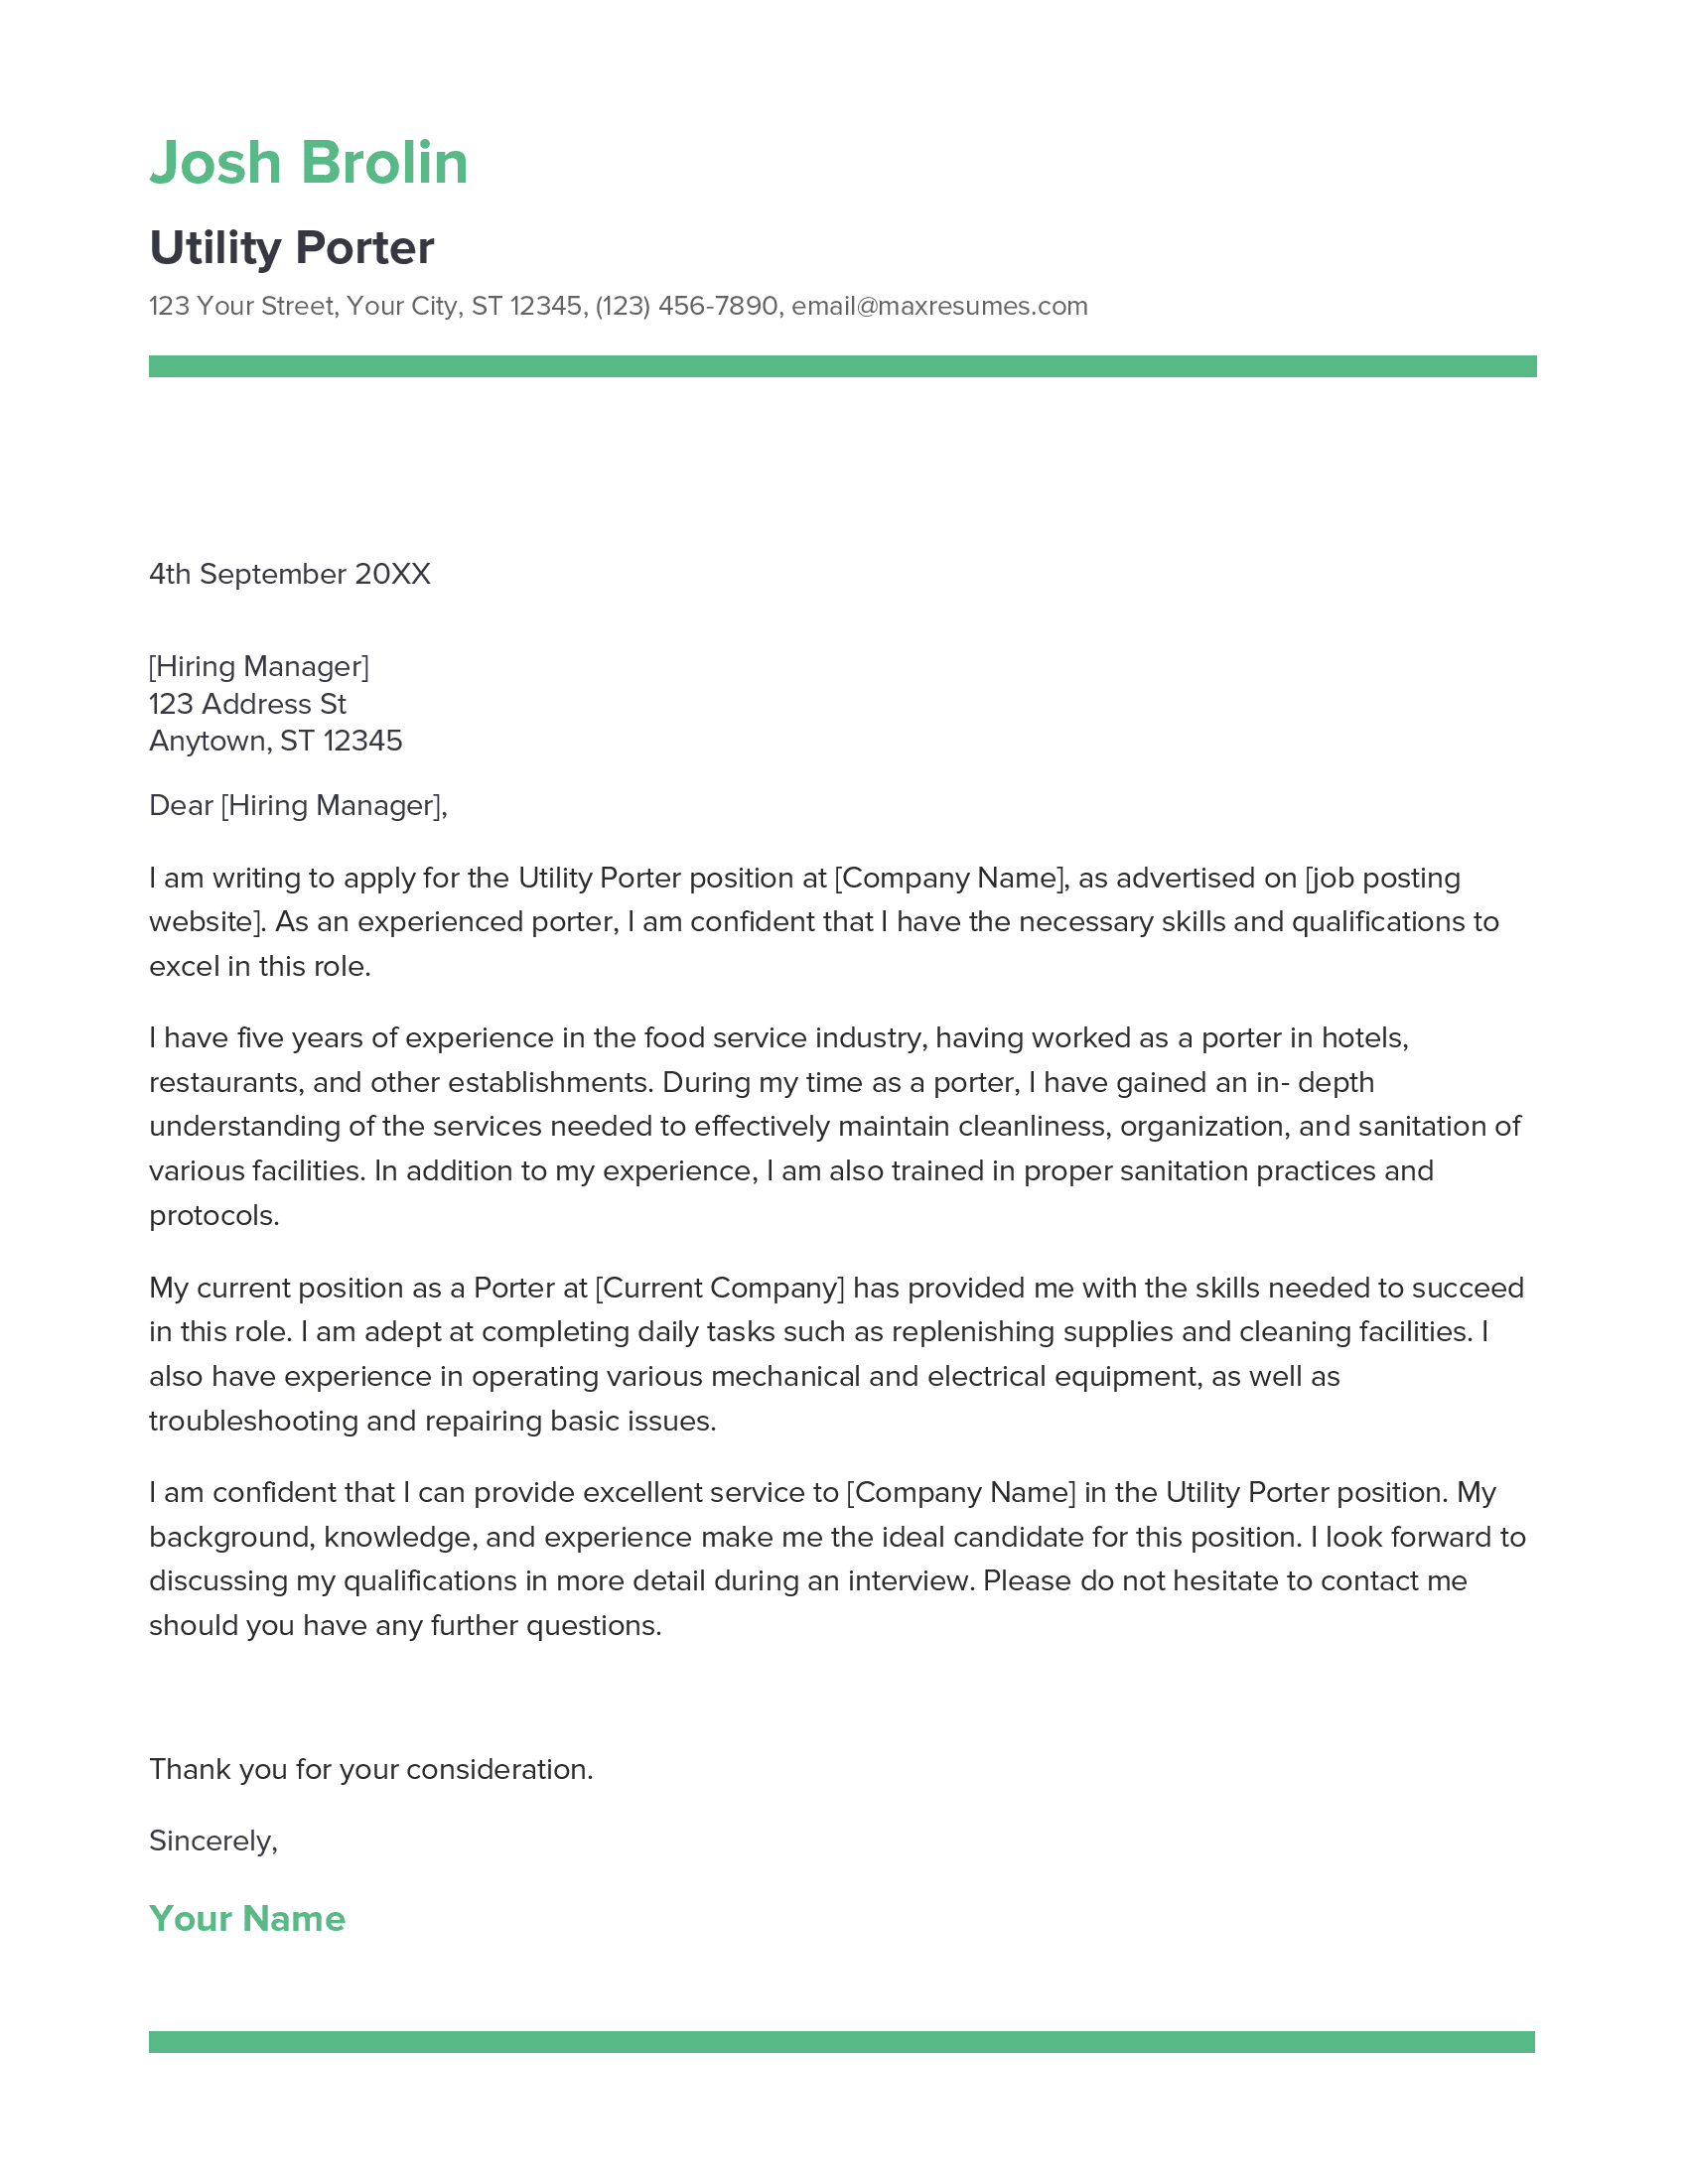 Utility Porter Cover Letter Example